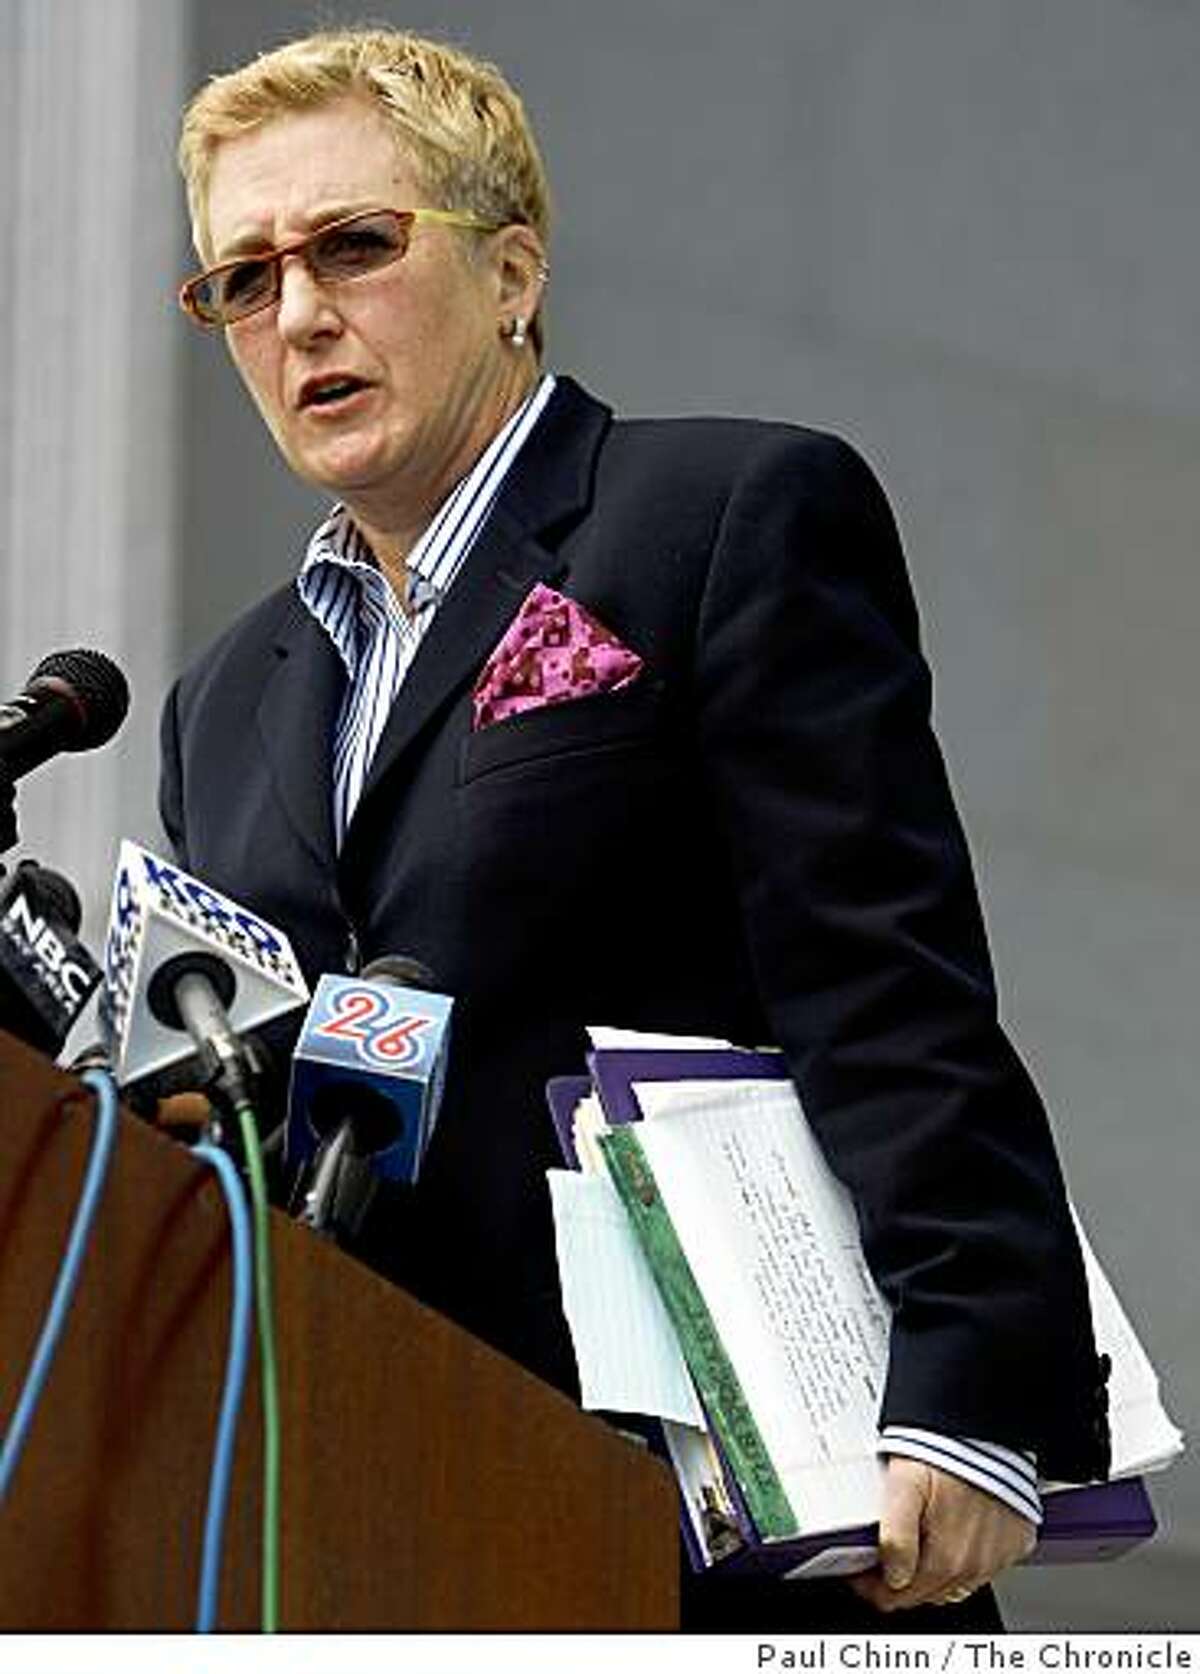 Deputy City Attorney Therese Stewart addresses a crowd gathered in front of the Earl Warren State Building after the California State Supreme Court heard arguments over the constitutionality of Proposition 8 in San Francisco, Calif., on Thursday, March 5, 2009.